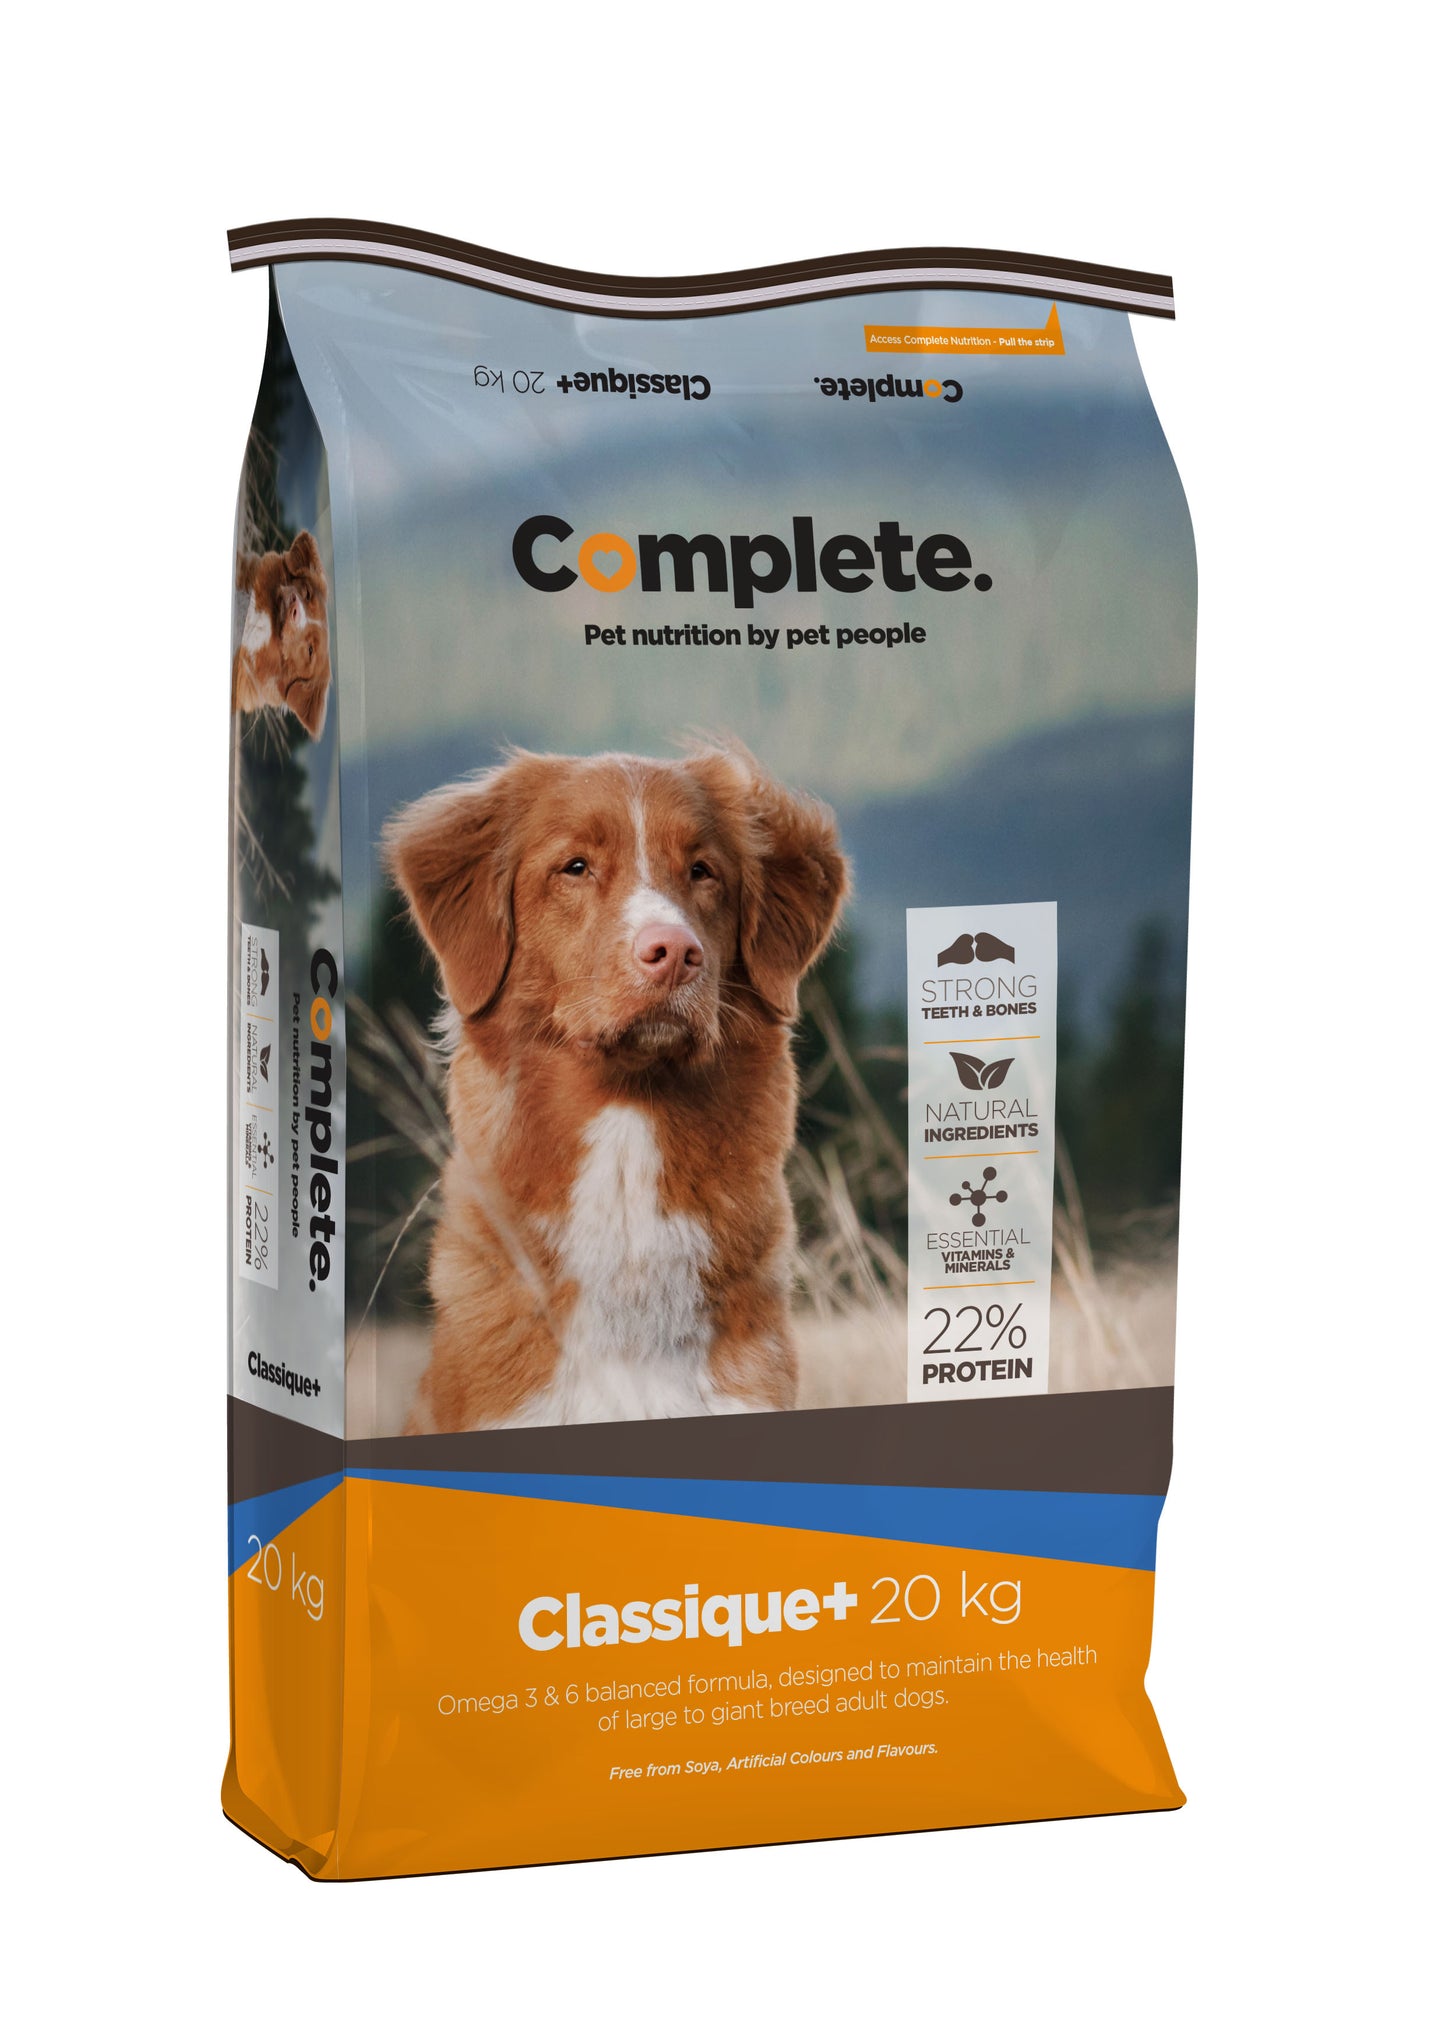 Classique+ 20kg Complete Pet Food For Large & Giant breed adult dogs from Pets Planet - South Africa’s No.1 Online Pet Store for premium pet products, best pet store near me, Dog food, pet food, dog wet food, dog bed, dog beds, washable dog bed, takealot dog bed, plush dog bed, Complete Pet Nutrition, Complete pet nutrition dog food, hills dog food, optimizor dog food, royal canin dog food, jock dog food, bobtail dog food, canine cuisine, acana dog food, best dog food, dog food near me, best dog food brands